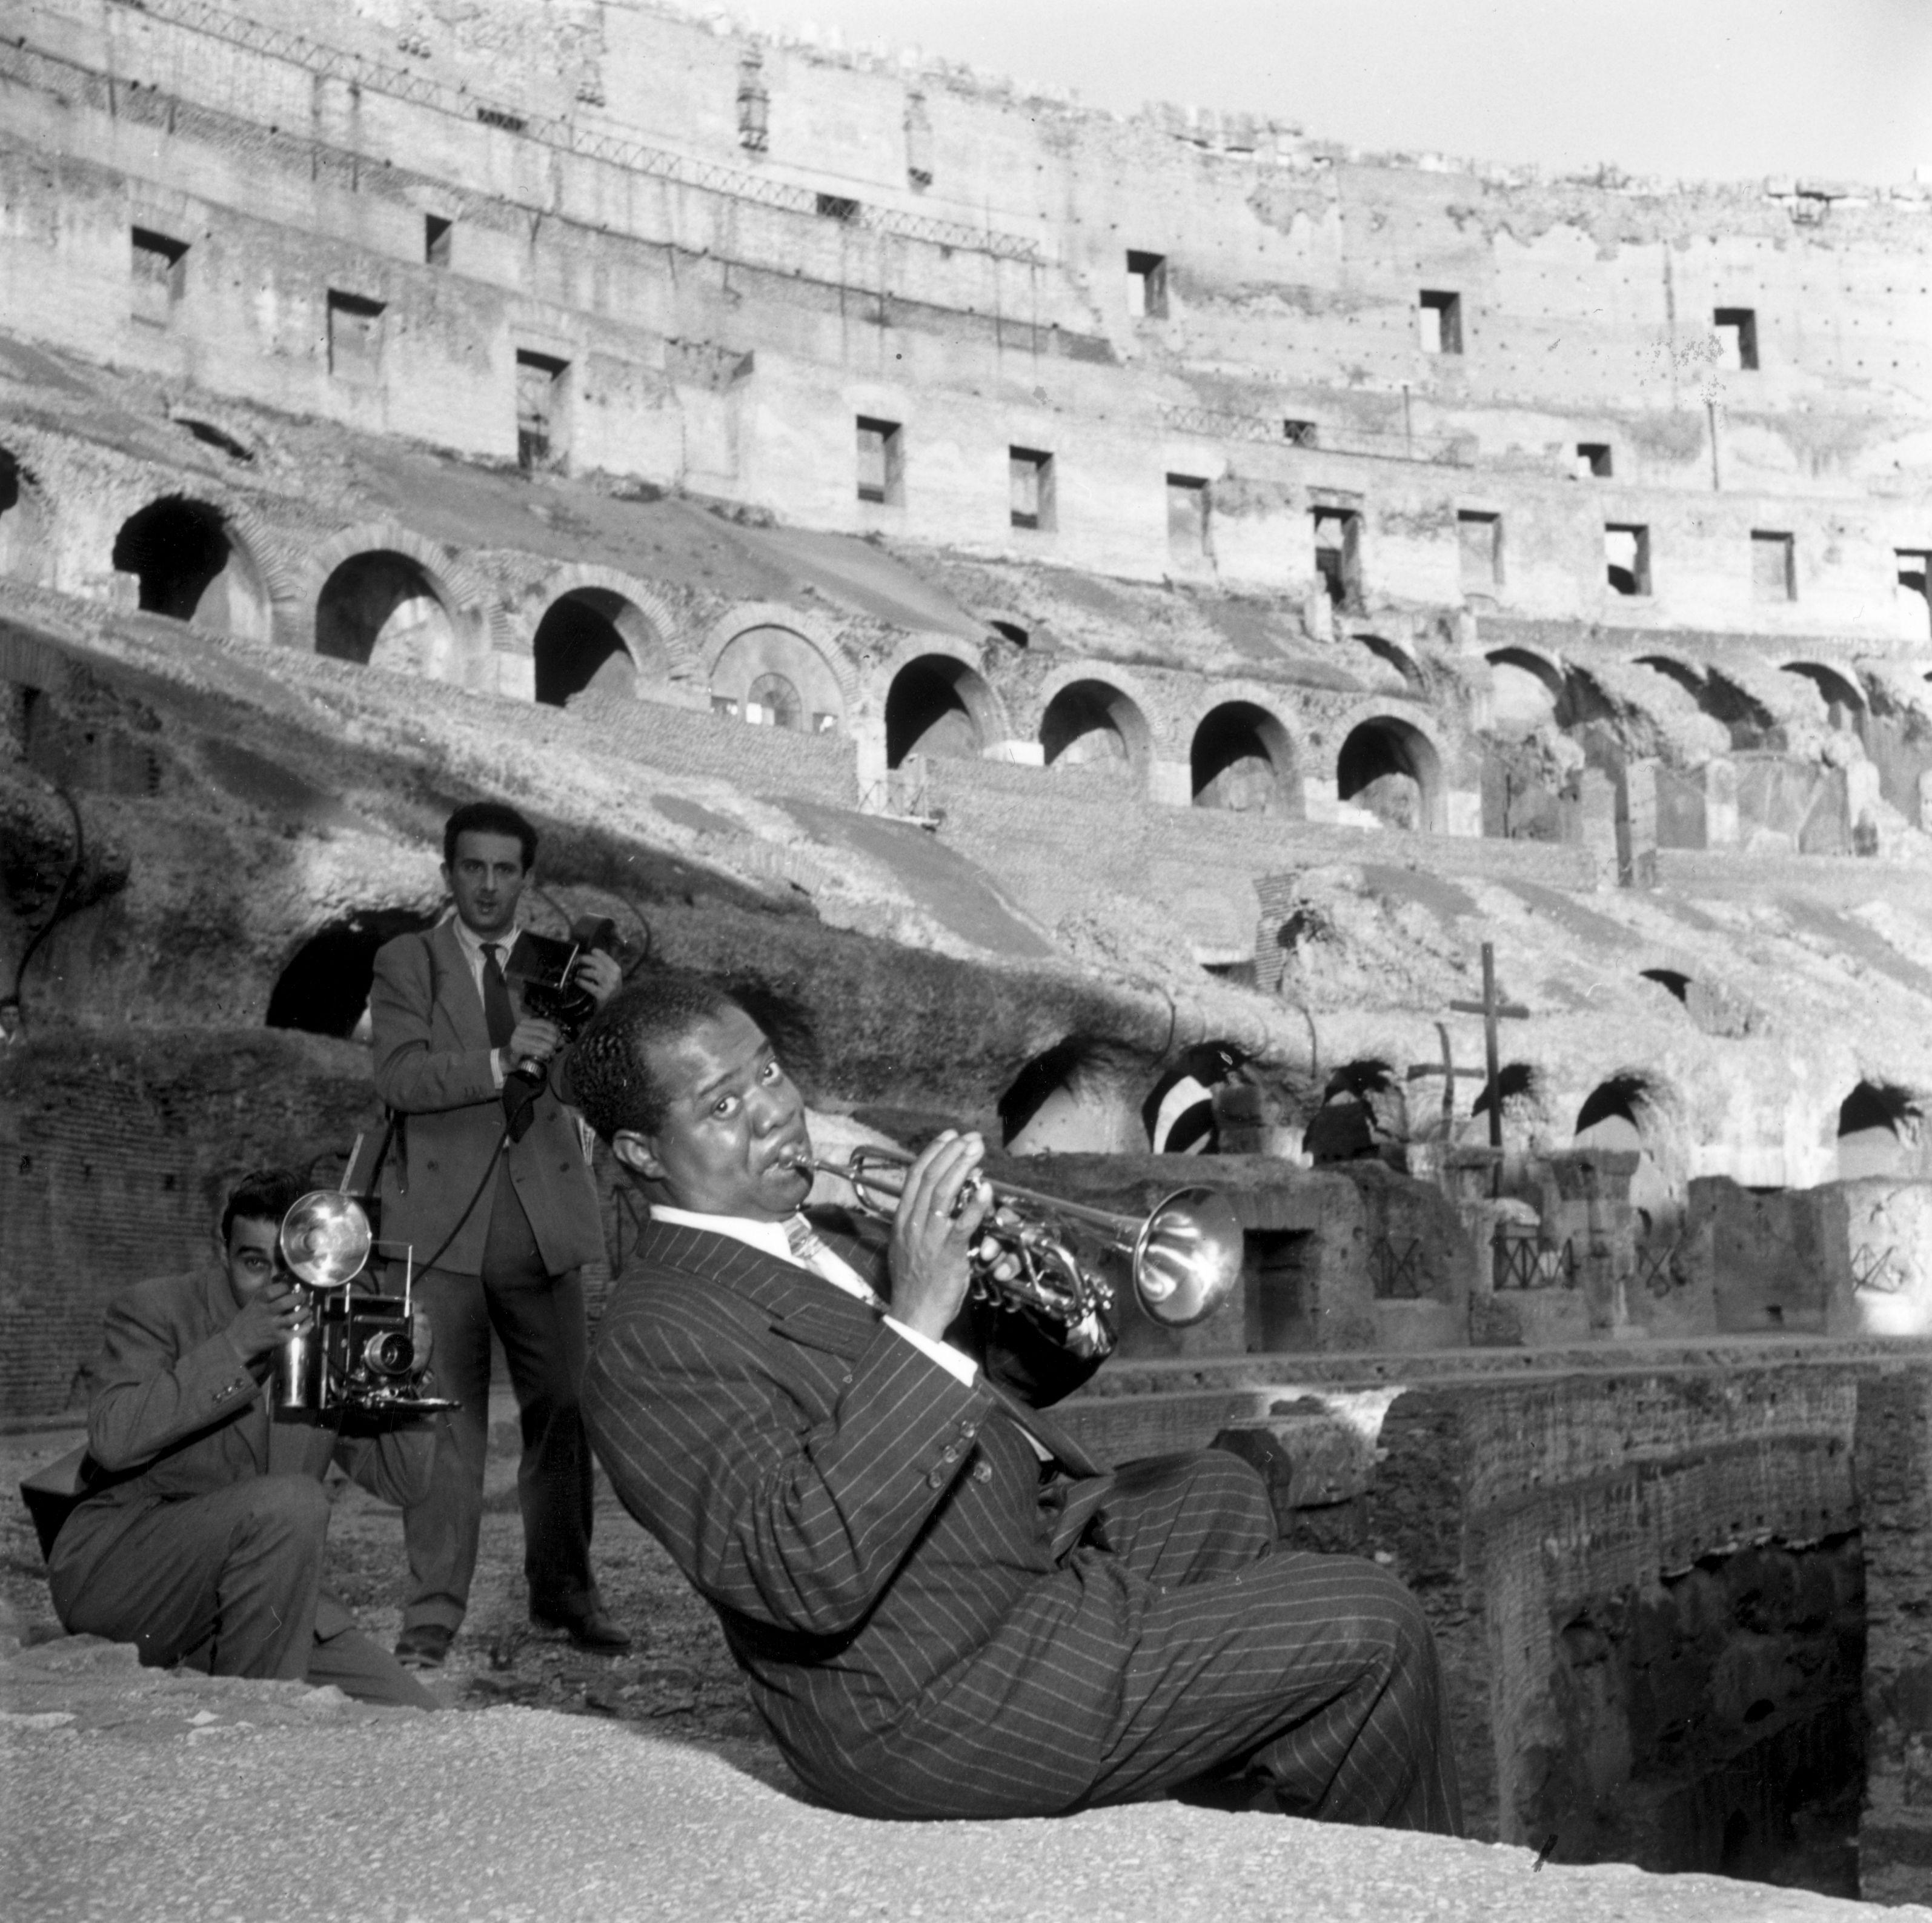 The King of Jazz, Louis Armstrong in Rome, Black and White Estate Edition